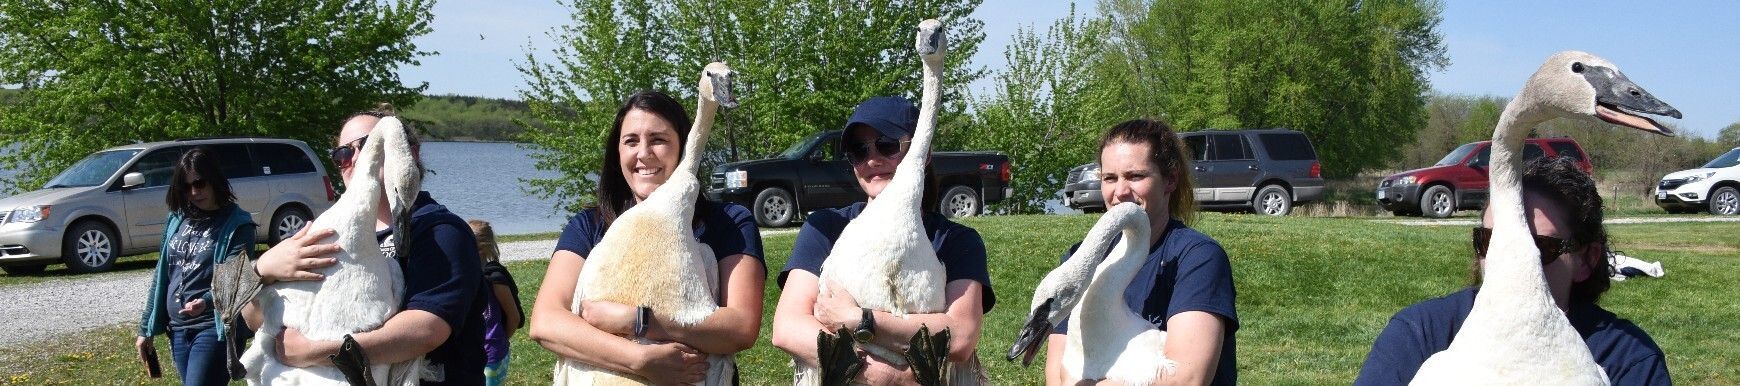 Neck collars including GPS tracking collars let us know locations of trumpeter swans